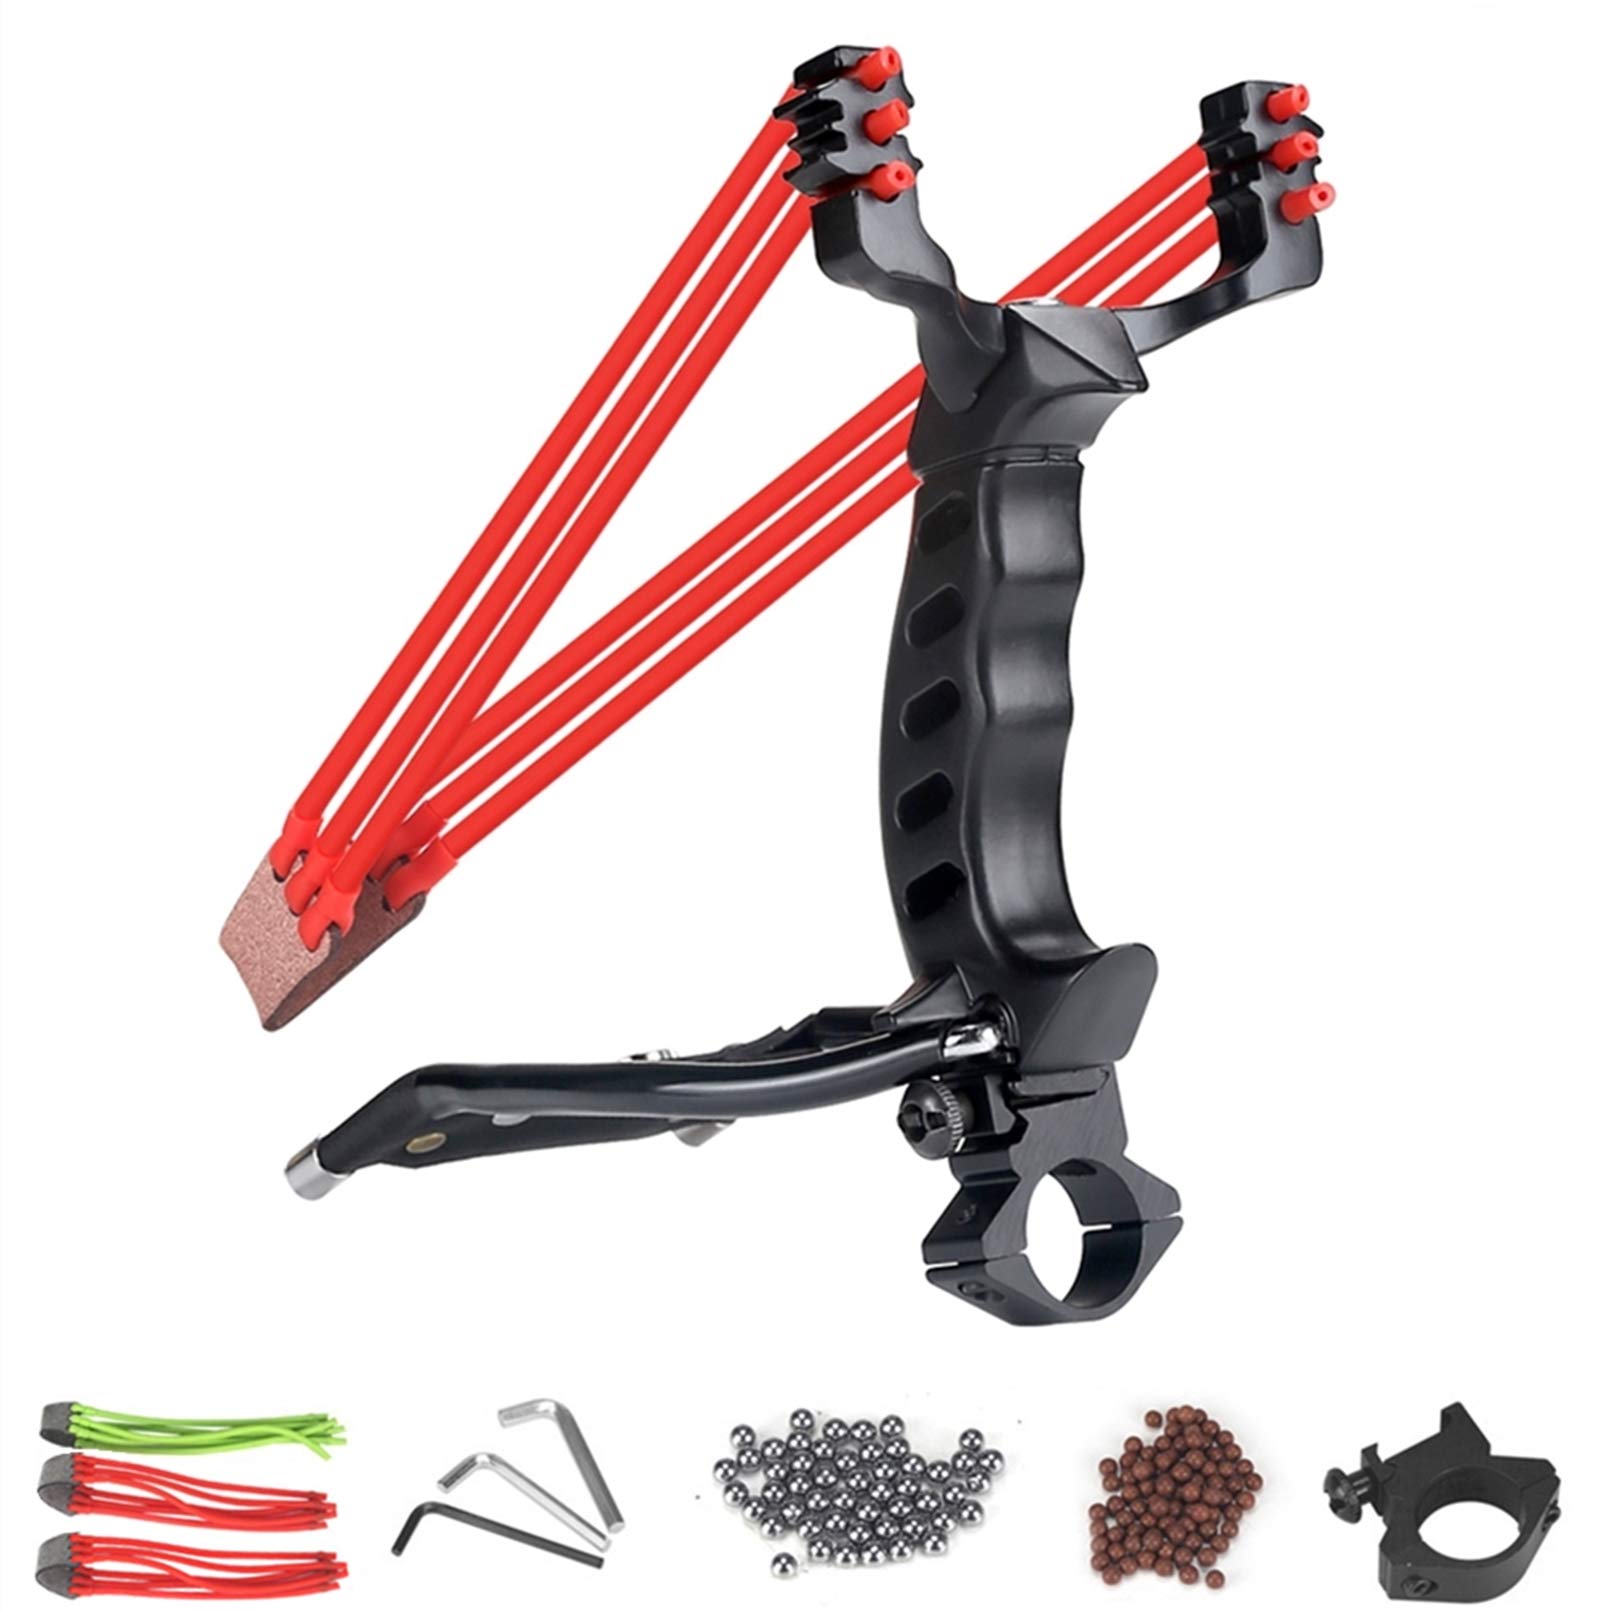 Powerful Rubber Slingshot Catapult Band For Outdoor Hunting Sling